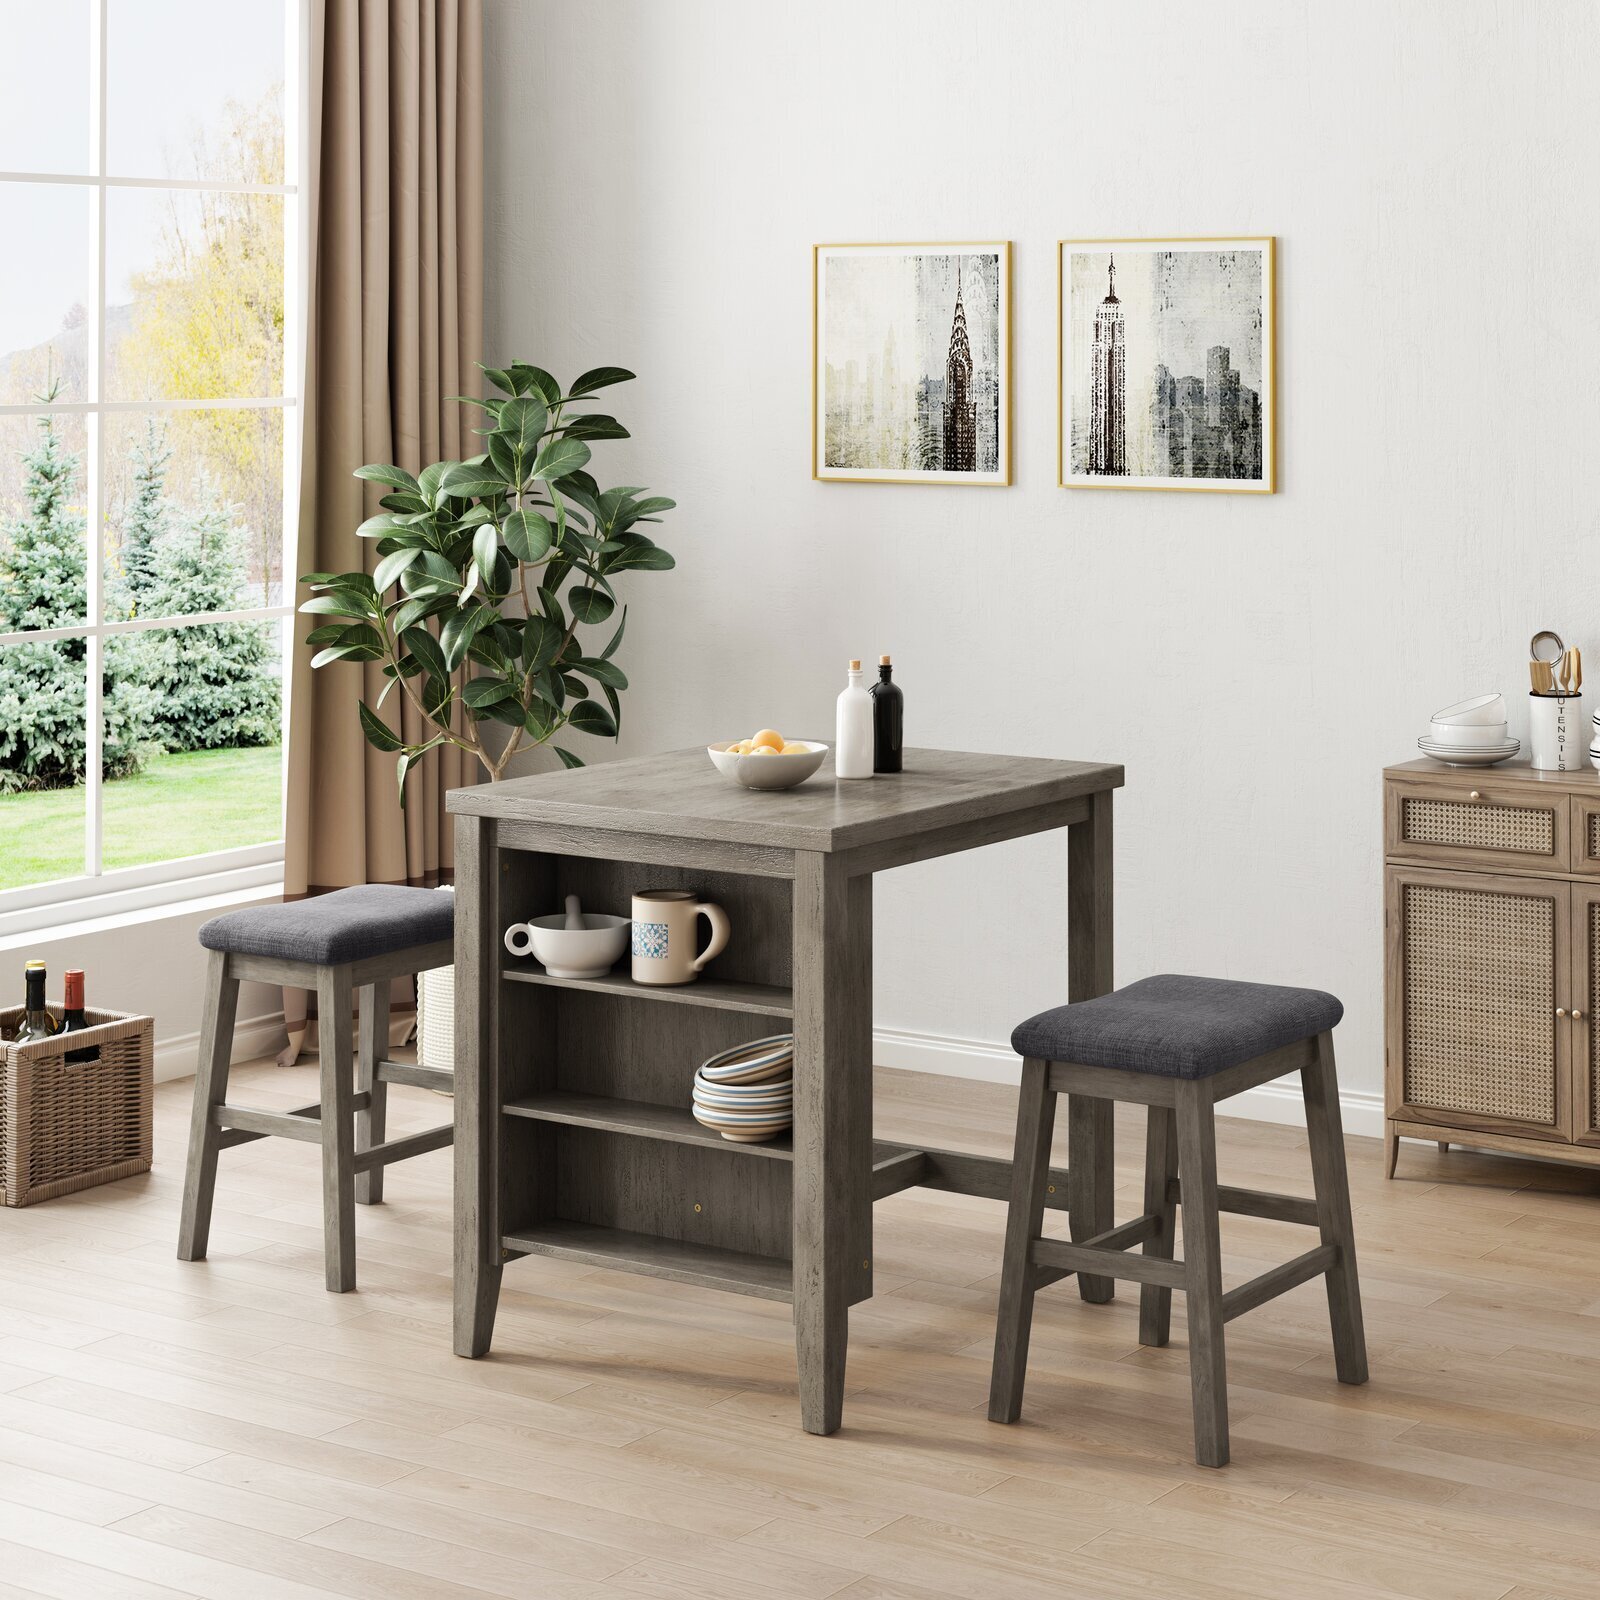 2 Stool Table with Shelves Breakfast Nook Set